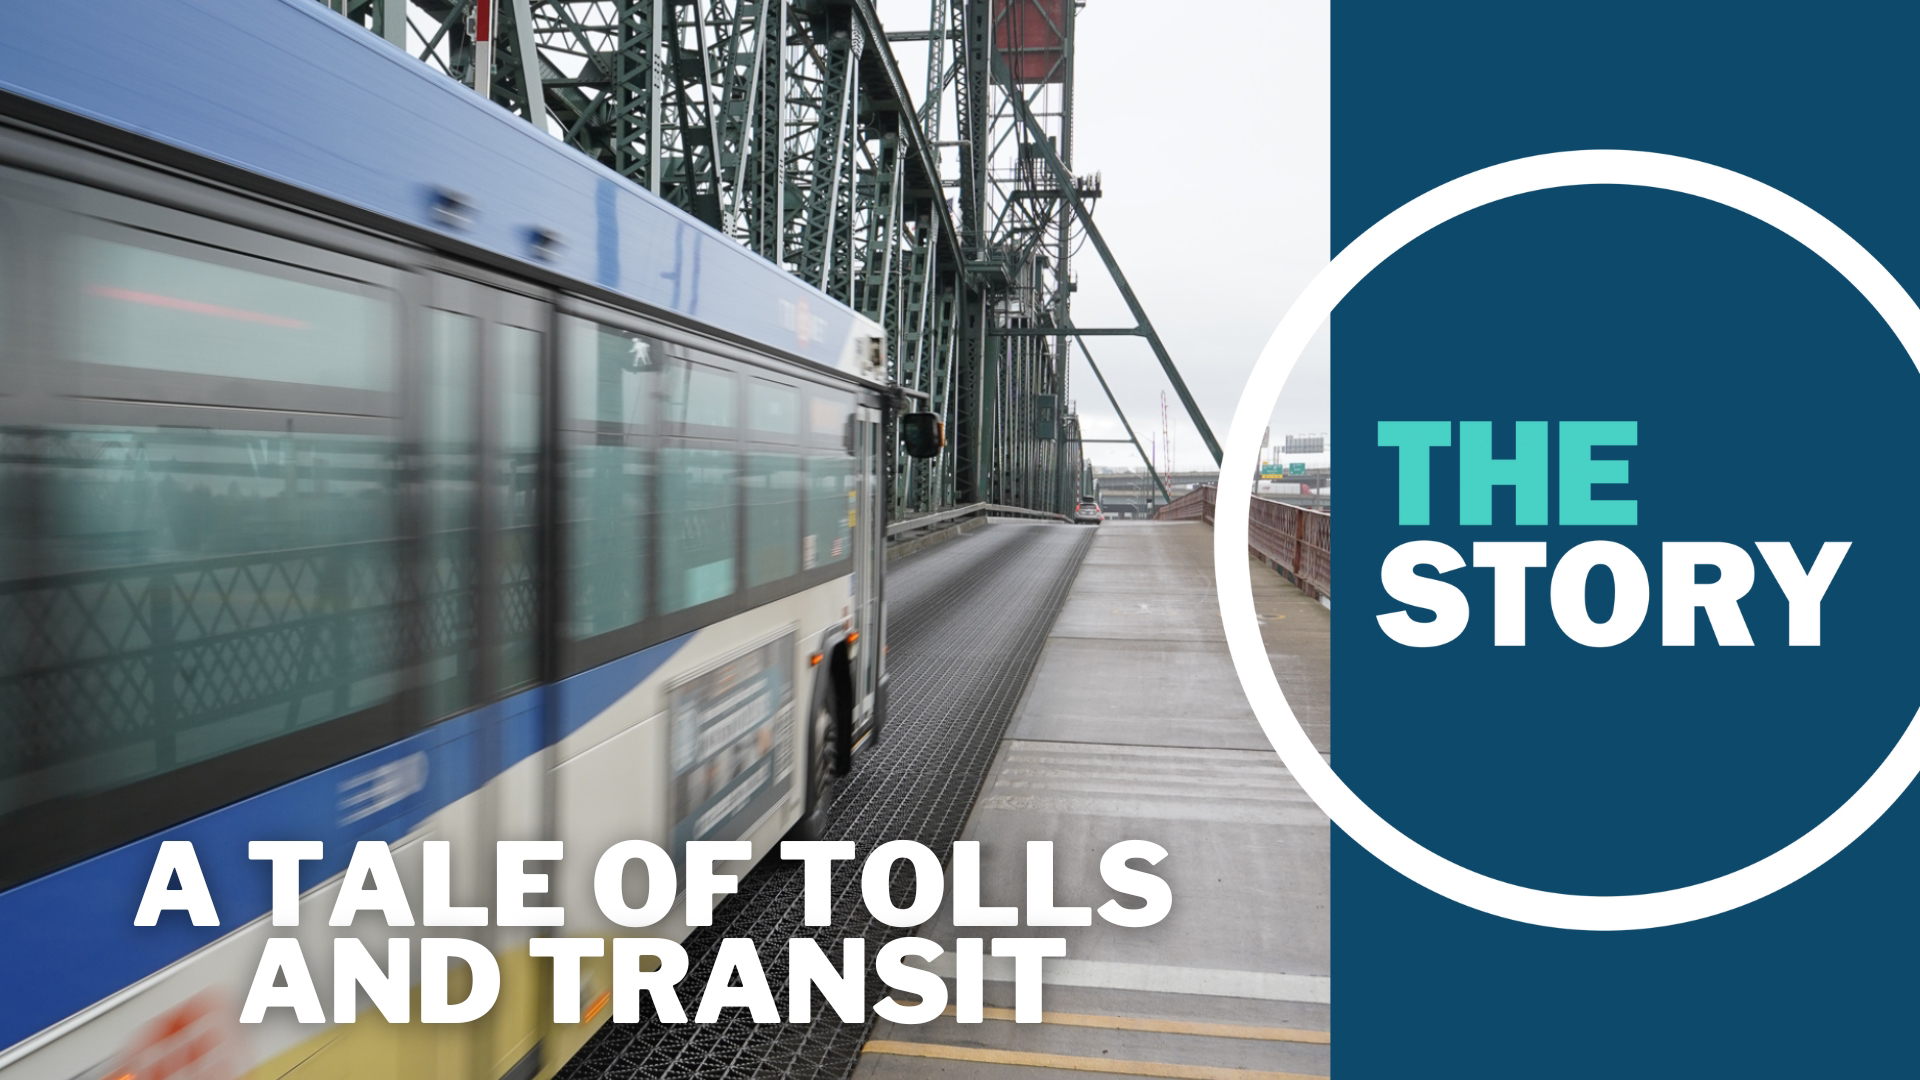 In addition to raising funds, the tolls are supposed to get commuters on public transit. Right now, TriMet doesn’t have the capacity to handle that.